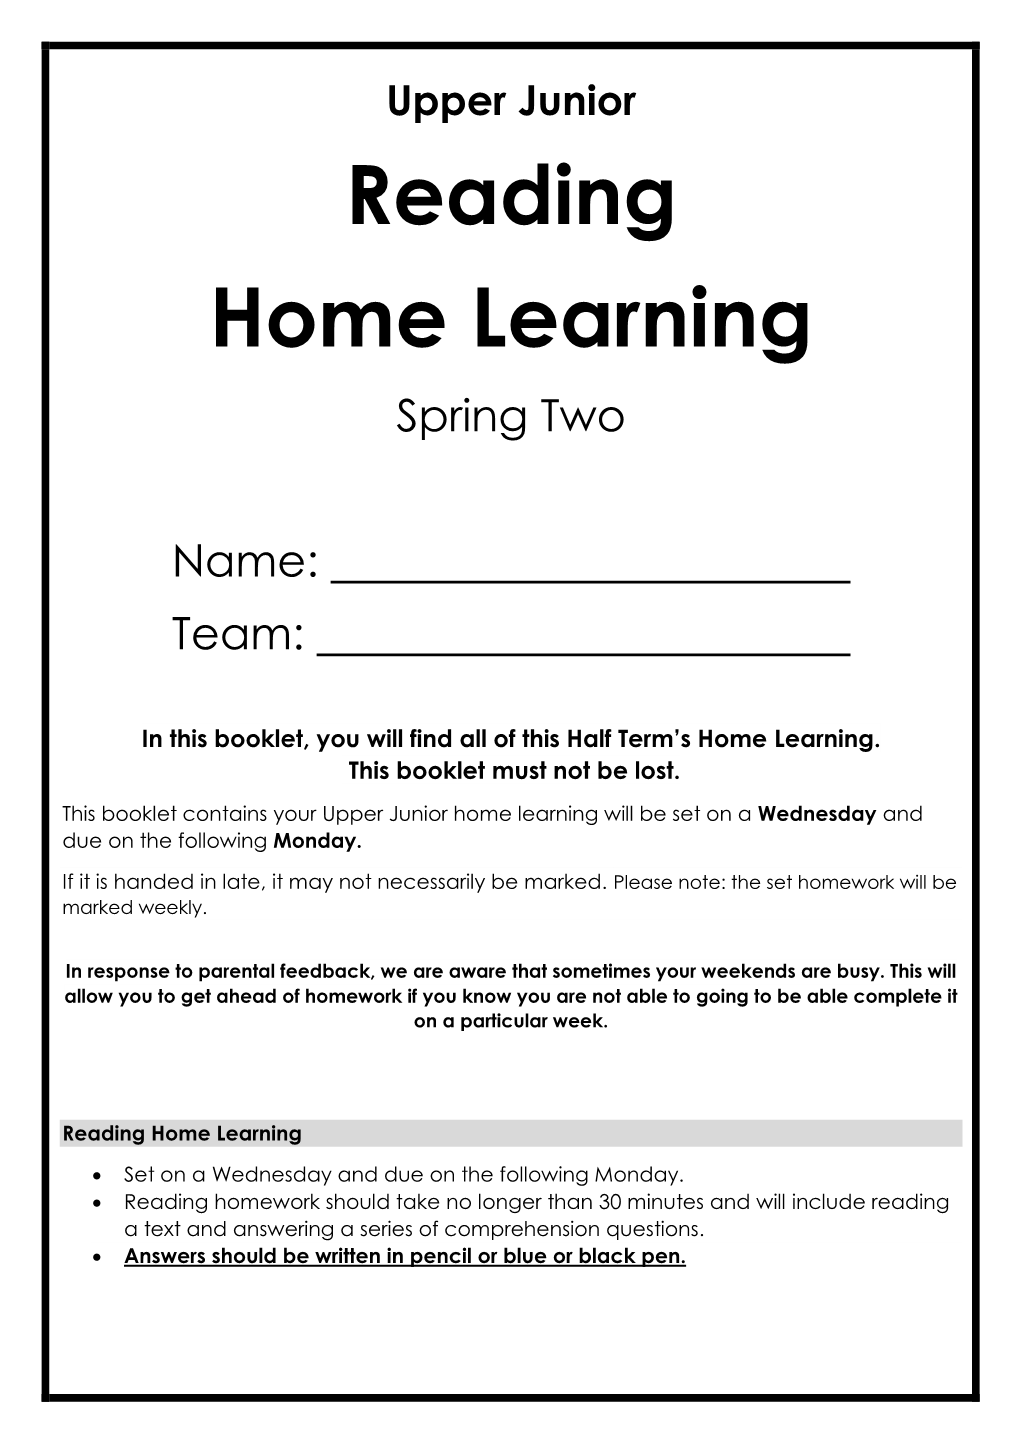 Reading Home Learning Spring Two